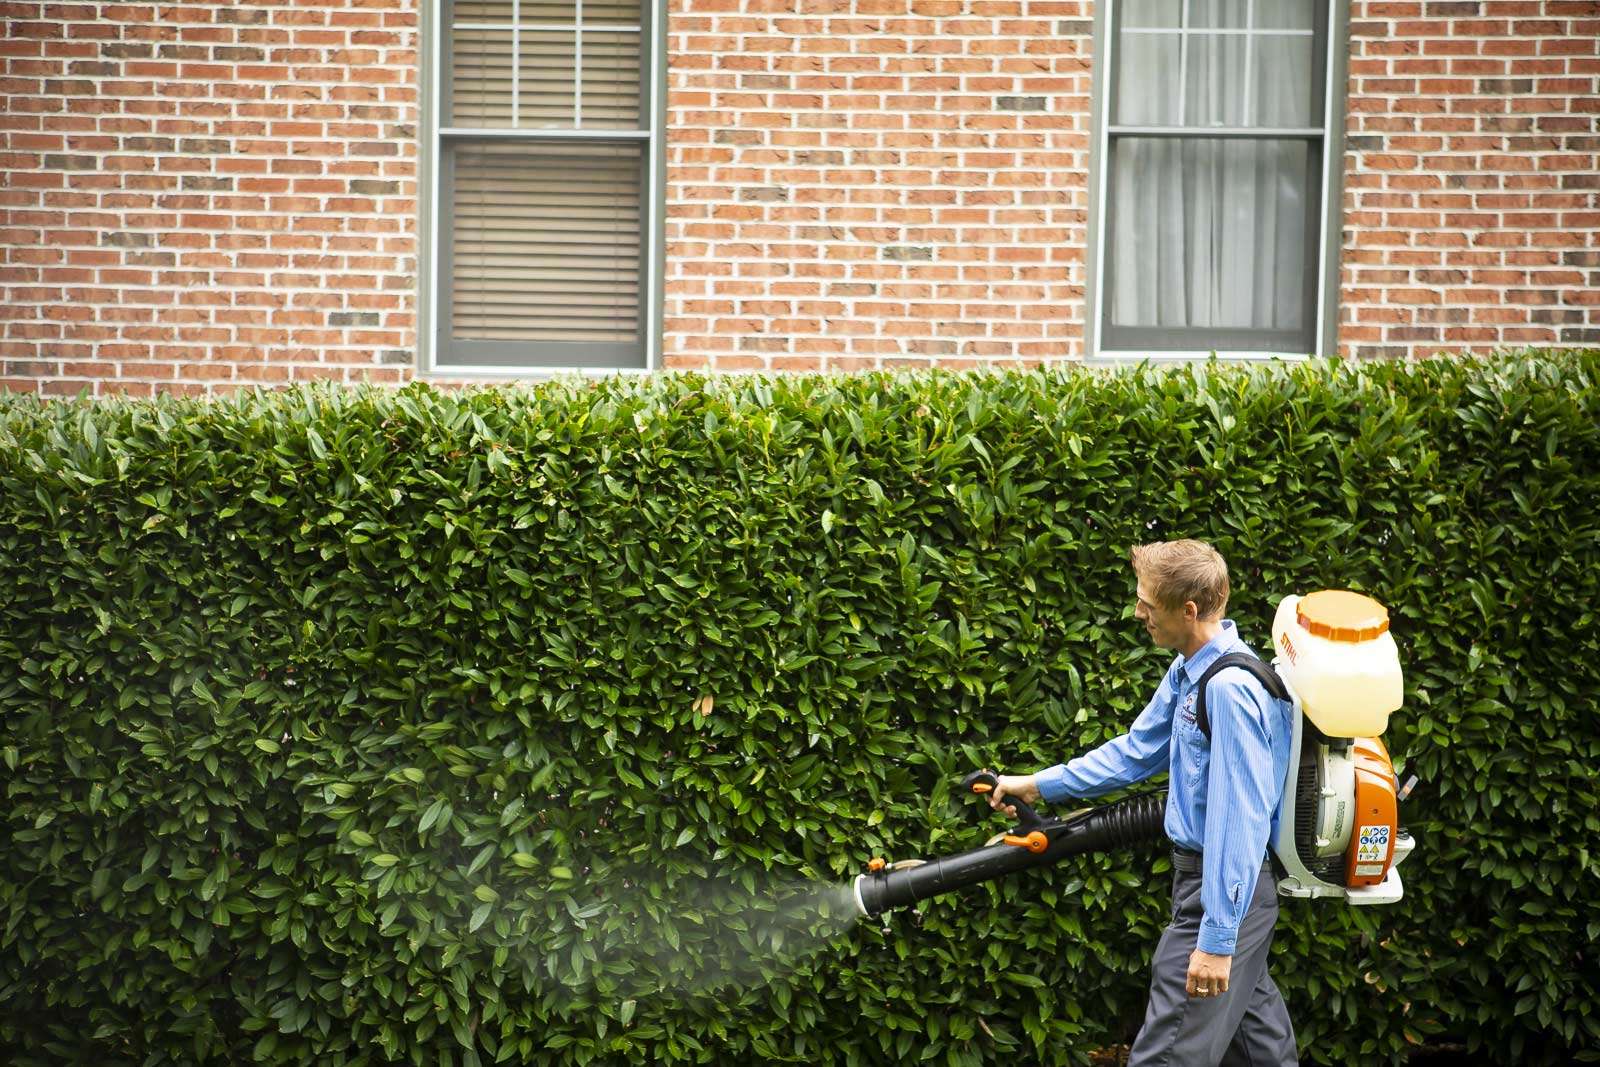 5 Common Questions About Perimeter Pest Control in Northern VA